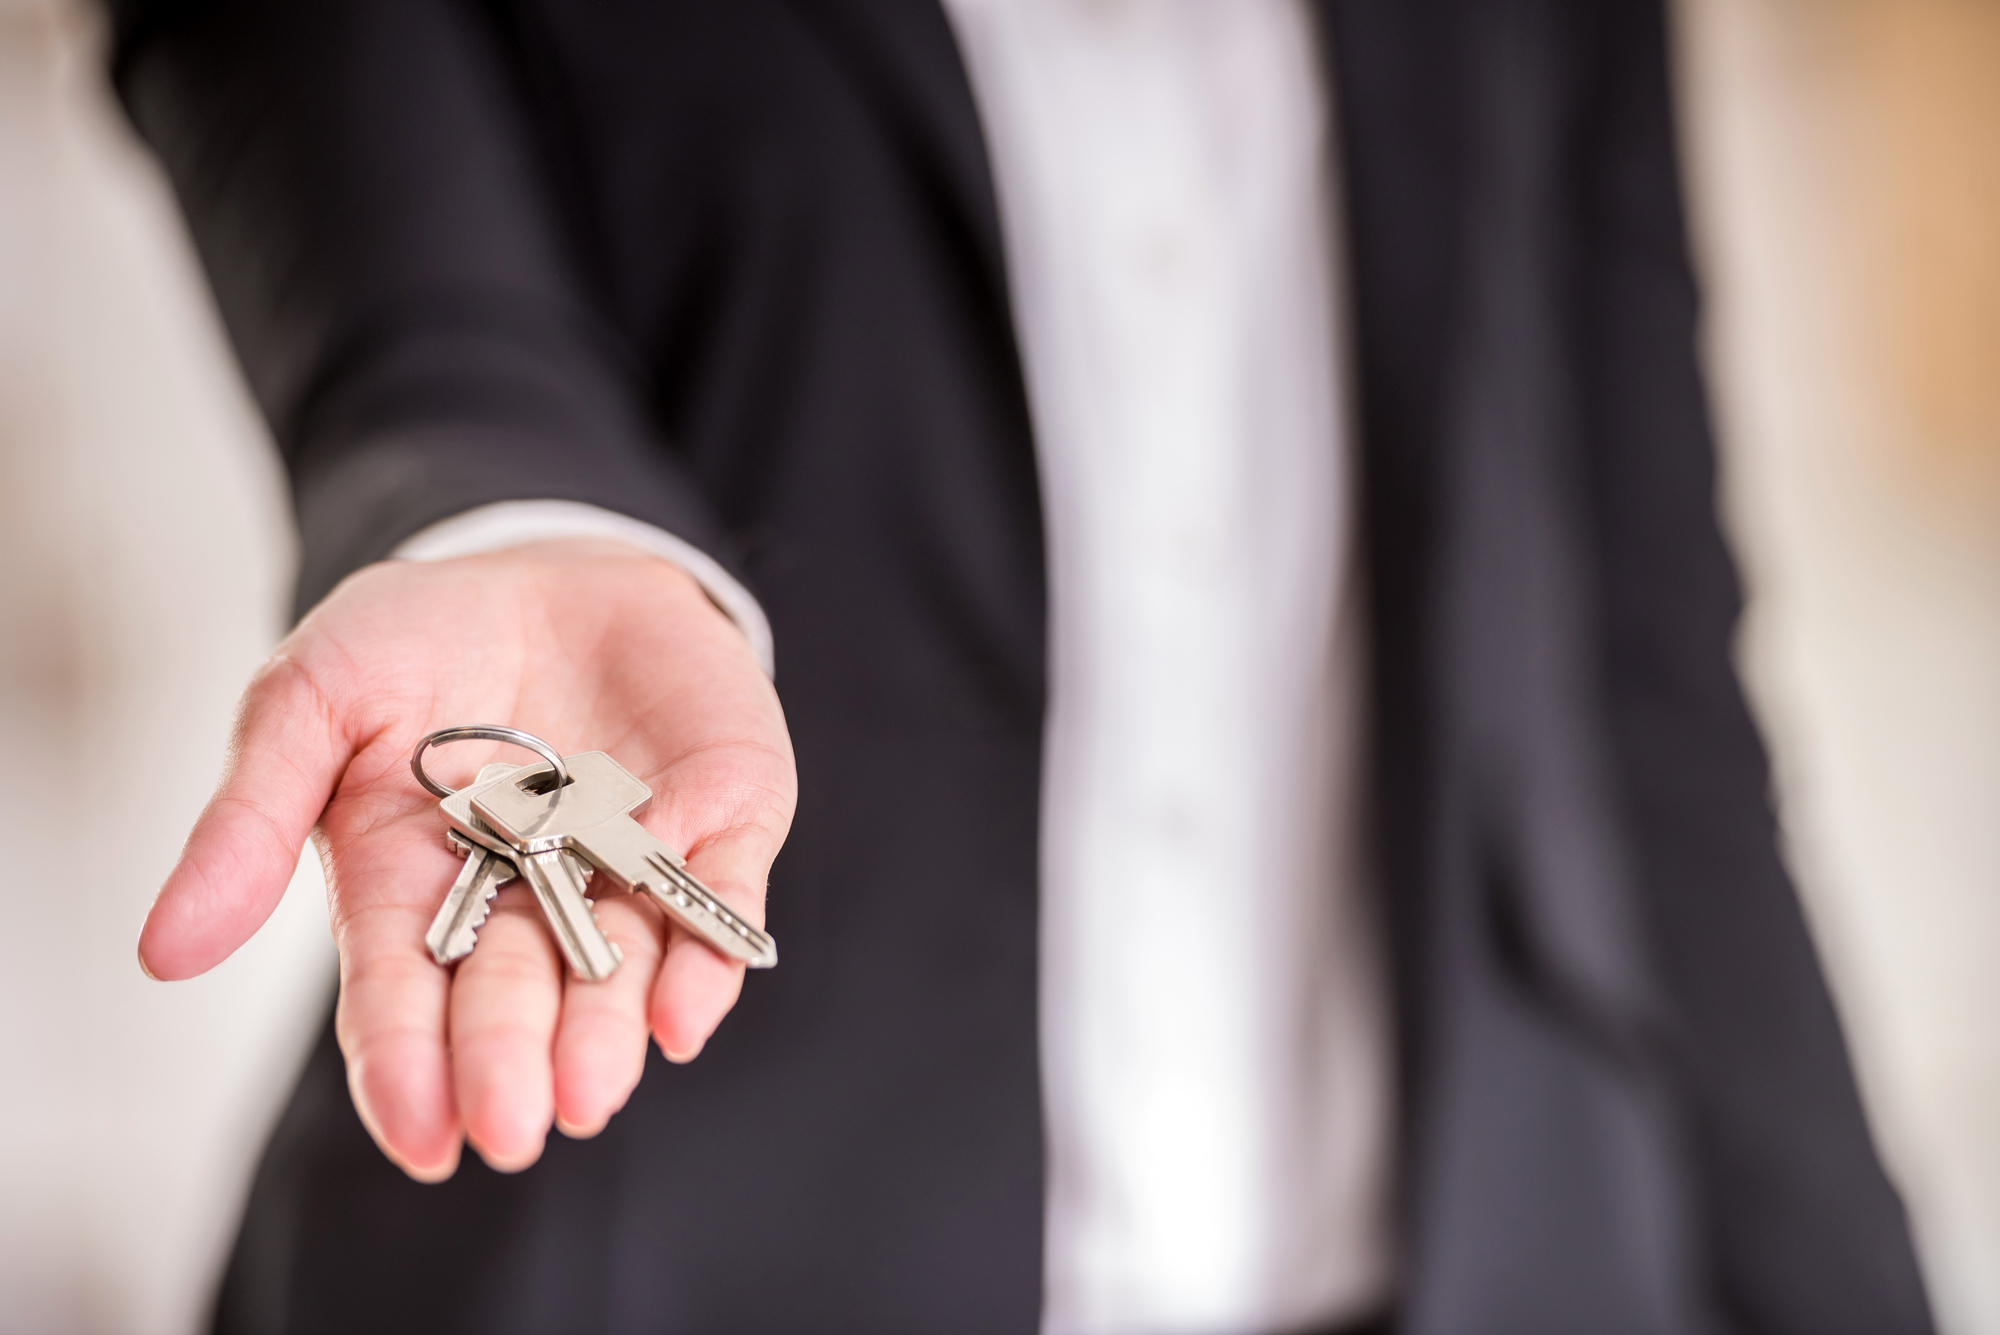 How Can You Become the Best Landlord? 4 Tips from an Expert Property Manager